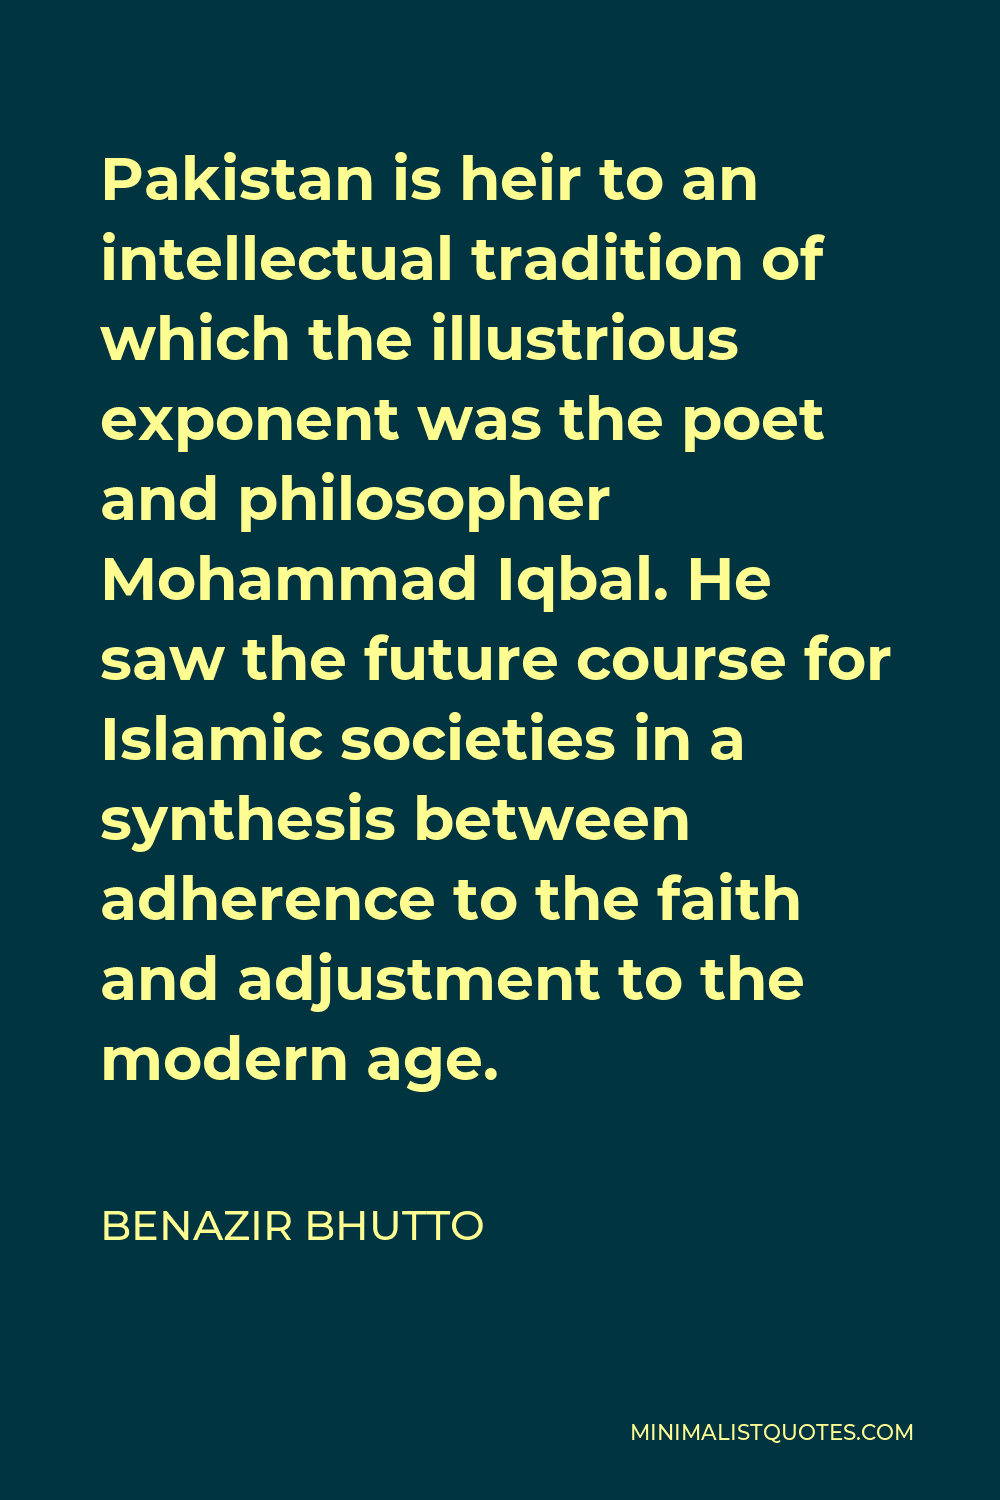 Benazir Bhutto Quote - Pakistan is heir to an intellectual tradition of which the illustrious exponent was the poet and philosopher Mohammad Iqbal. He saw the future course for Islamic societies in a synthesis between adherence to the faith and adjustment to the modern age.